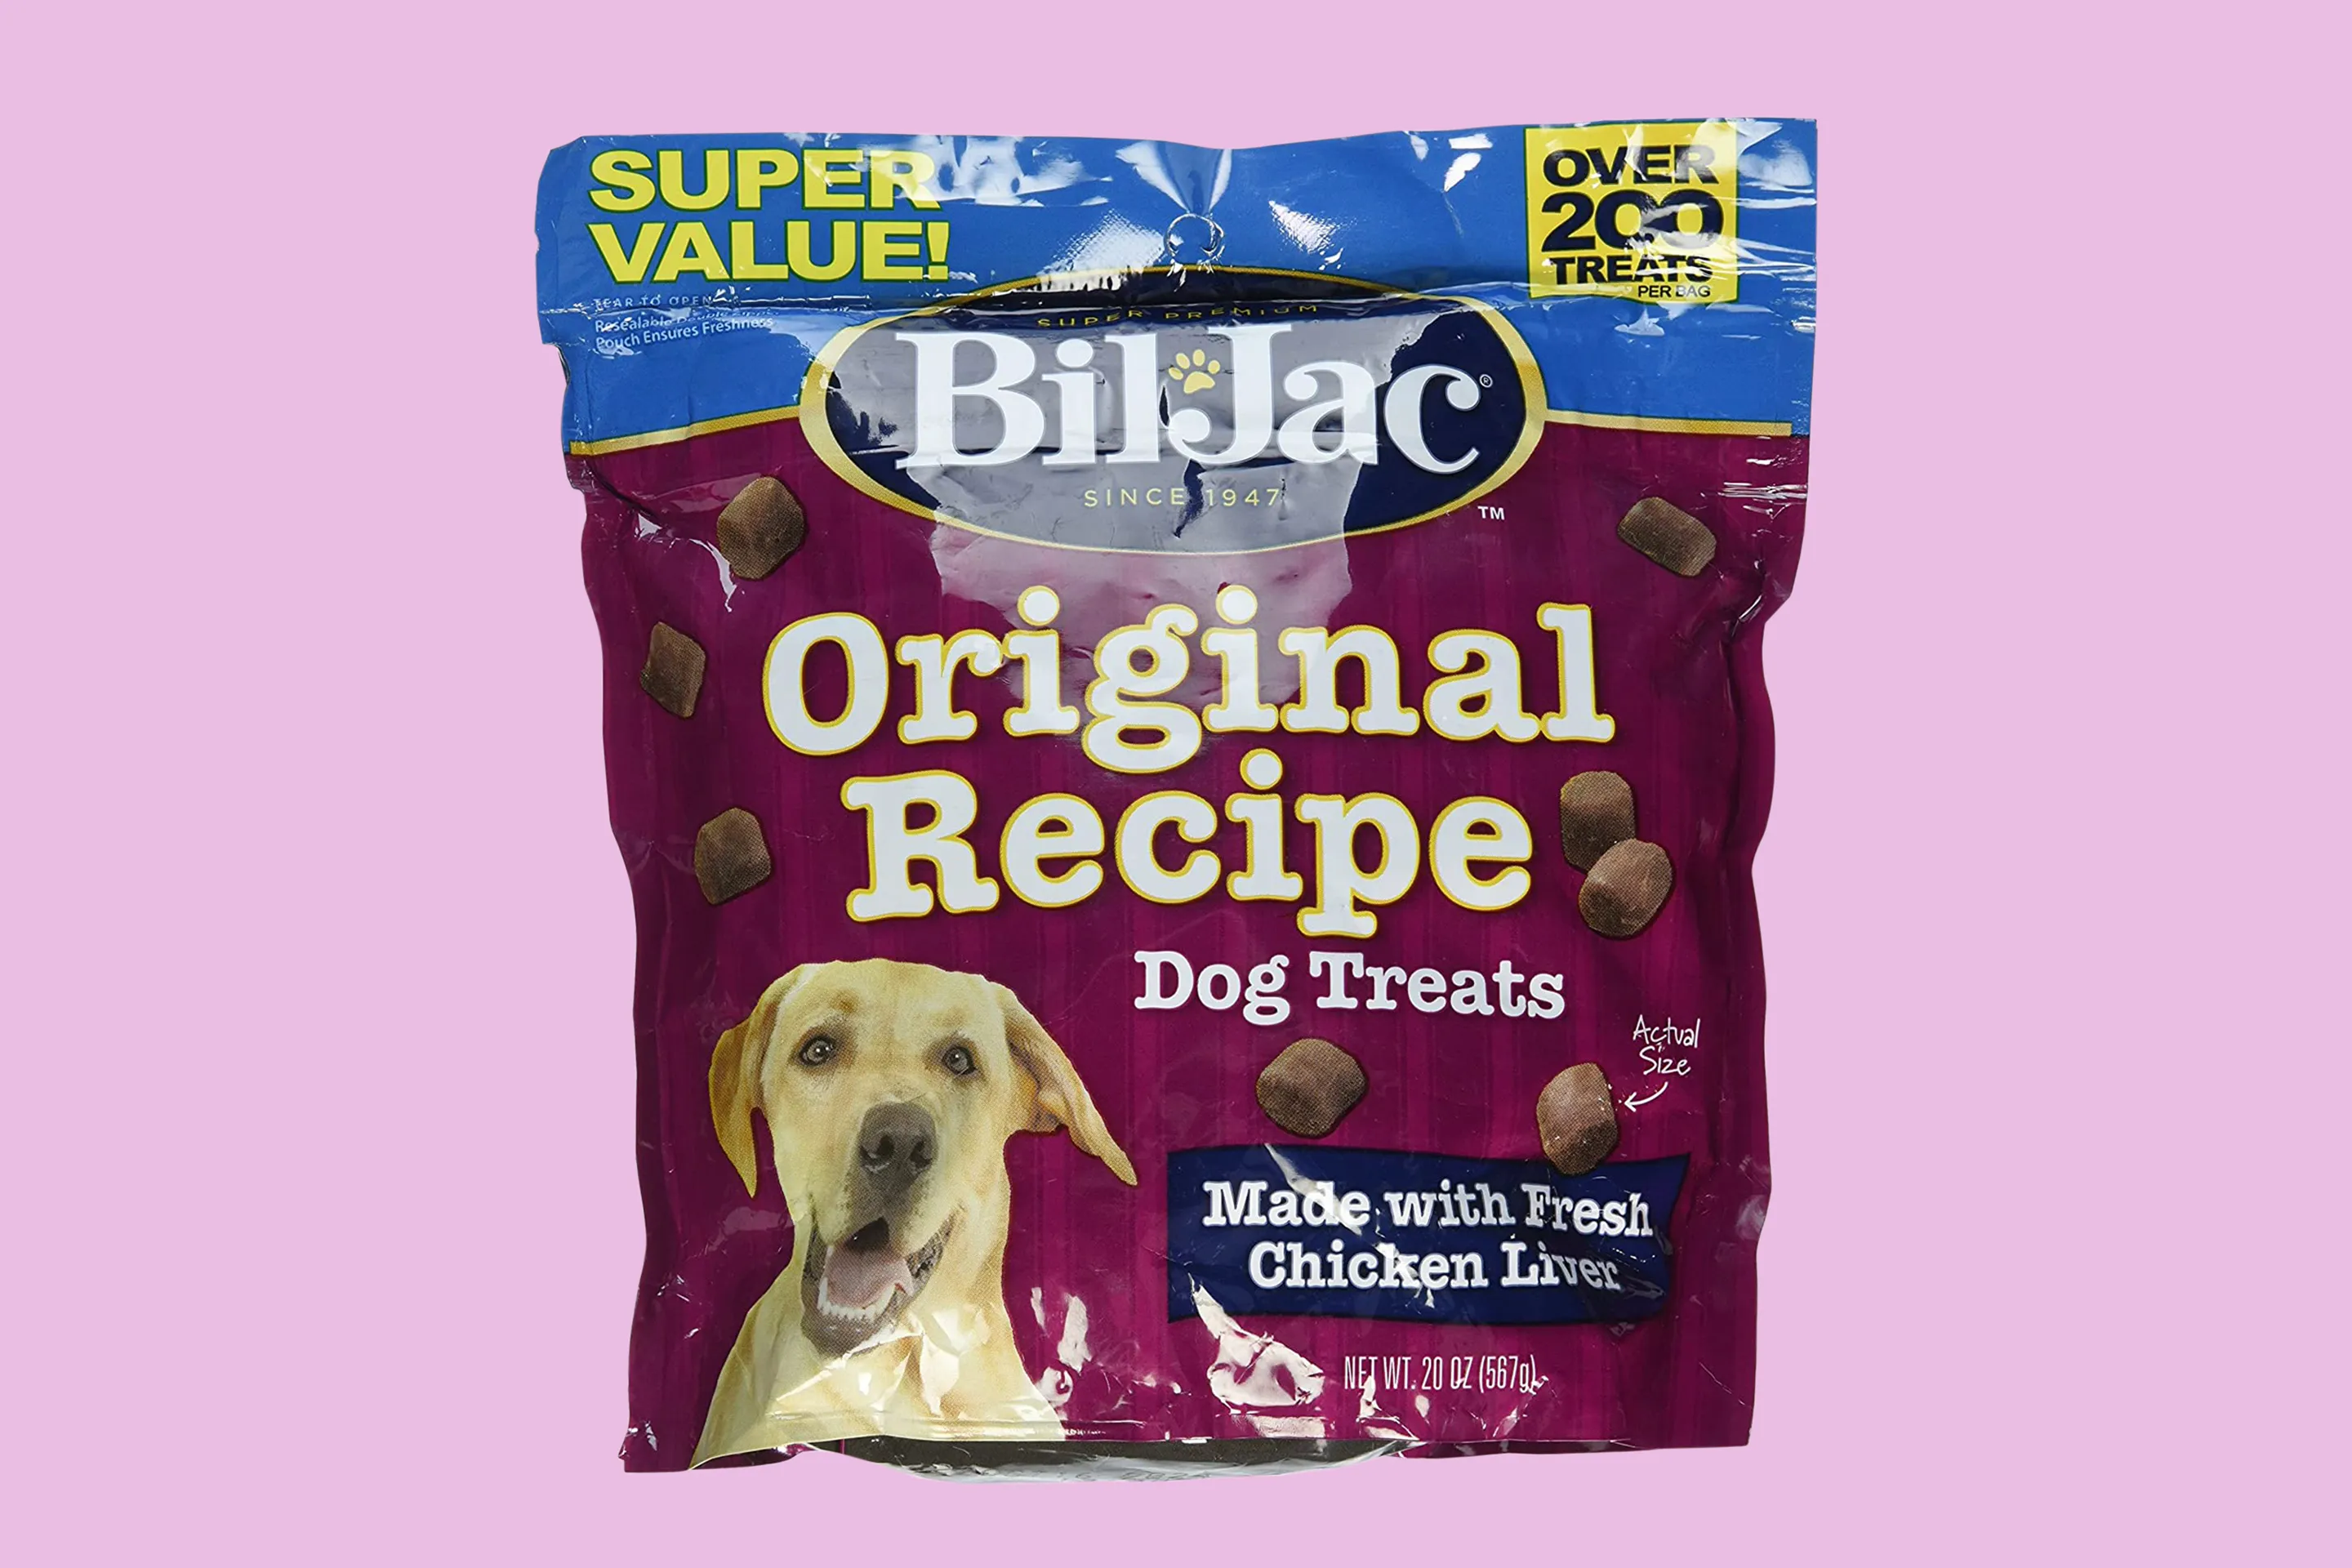  Rocco & Roxie Jerky Dog Treats Made in USA Healthy Treats for  Potty Training High Value Real Meat Slow Roasted Snacks for Small, Medium &  Large Dogs & Puppies Soft